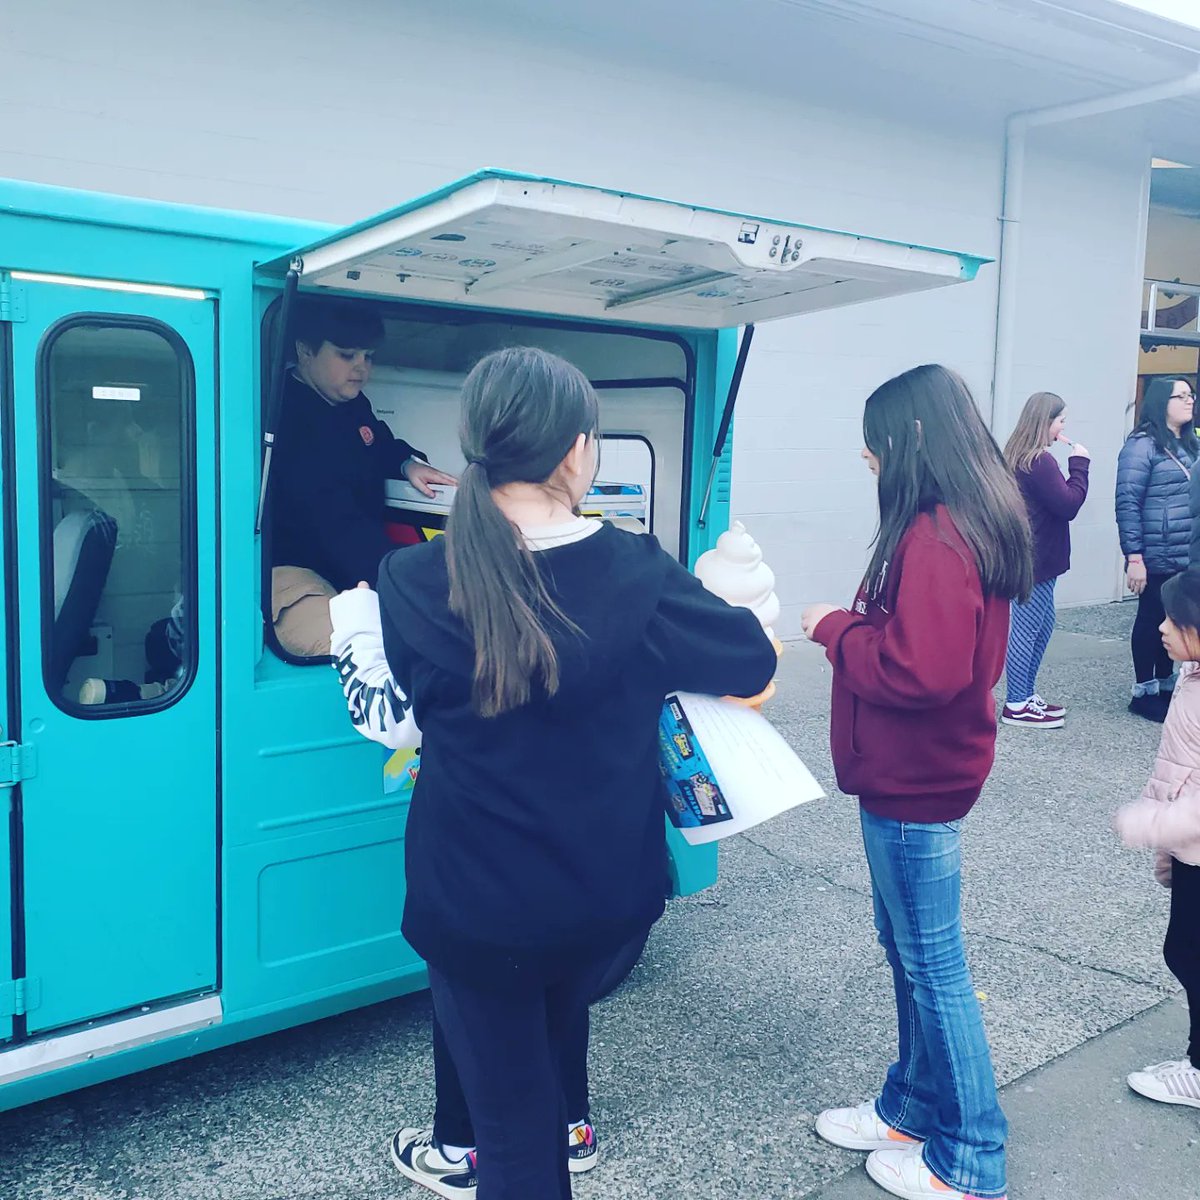 Marysville Middle School you are amazing as always. We had a great time serving you and your students last night. Thanks so much for inviting us back to serve ice cream to your families.  Marysville Middle School #marysvillewa #marysvillewashington